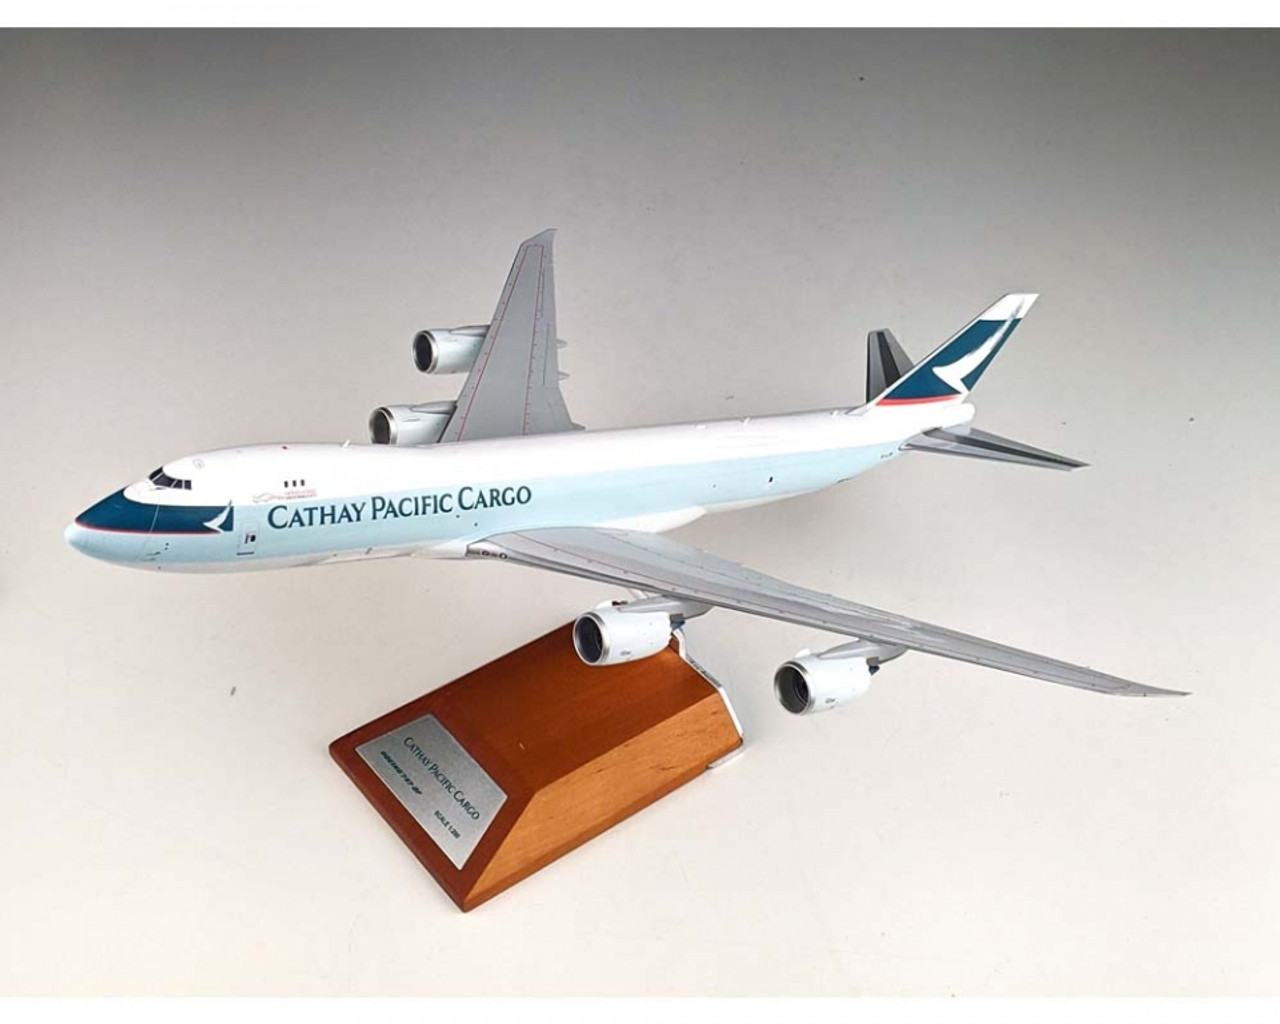 JC200 1:200 Cathay Pacific Cargo 747-8F